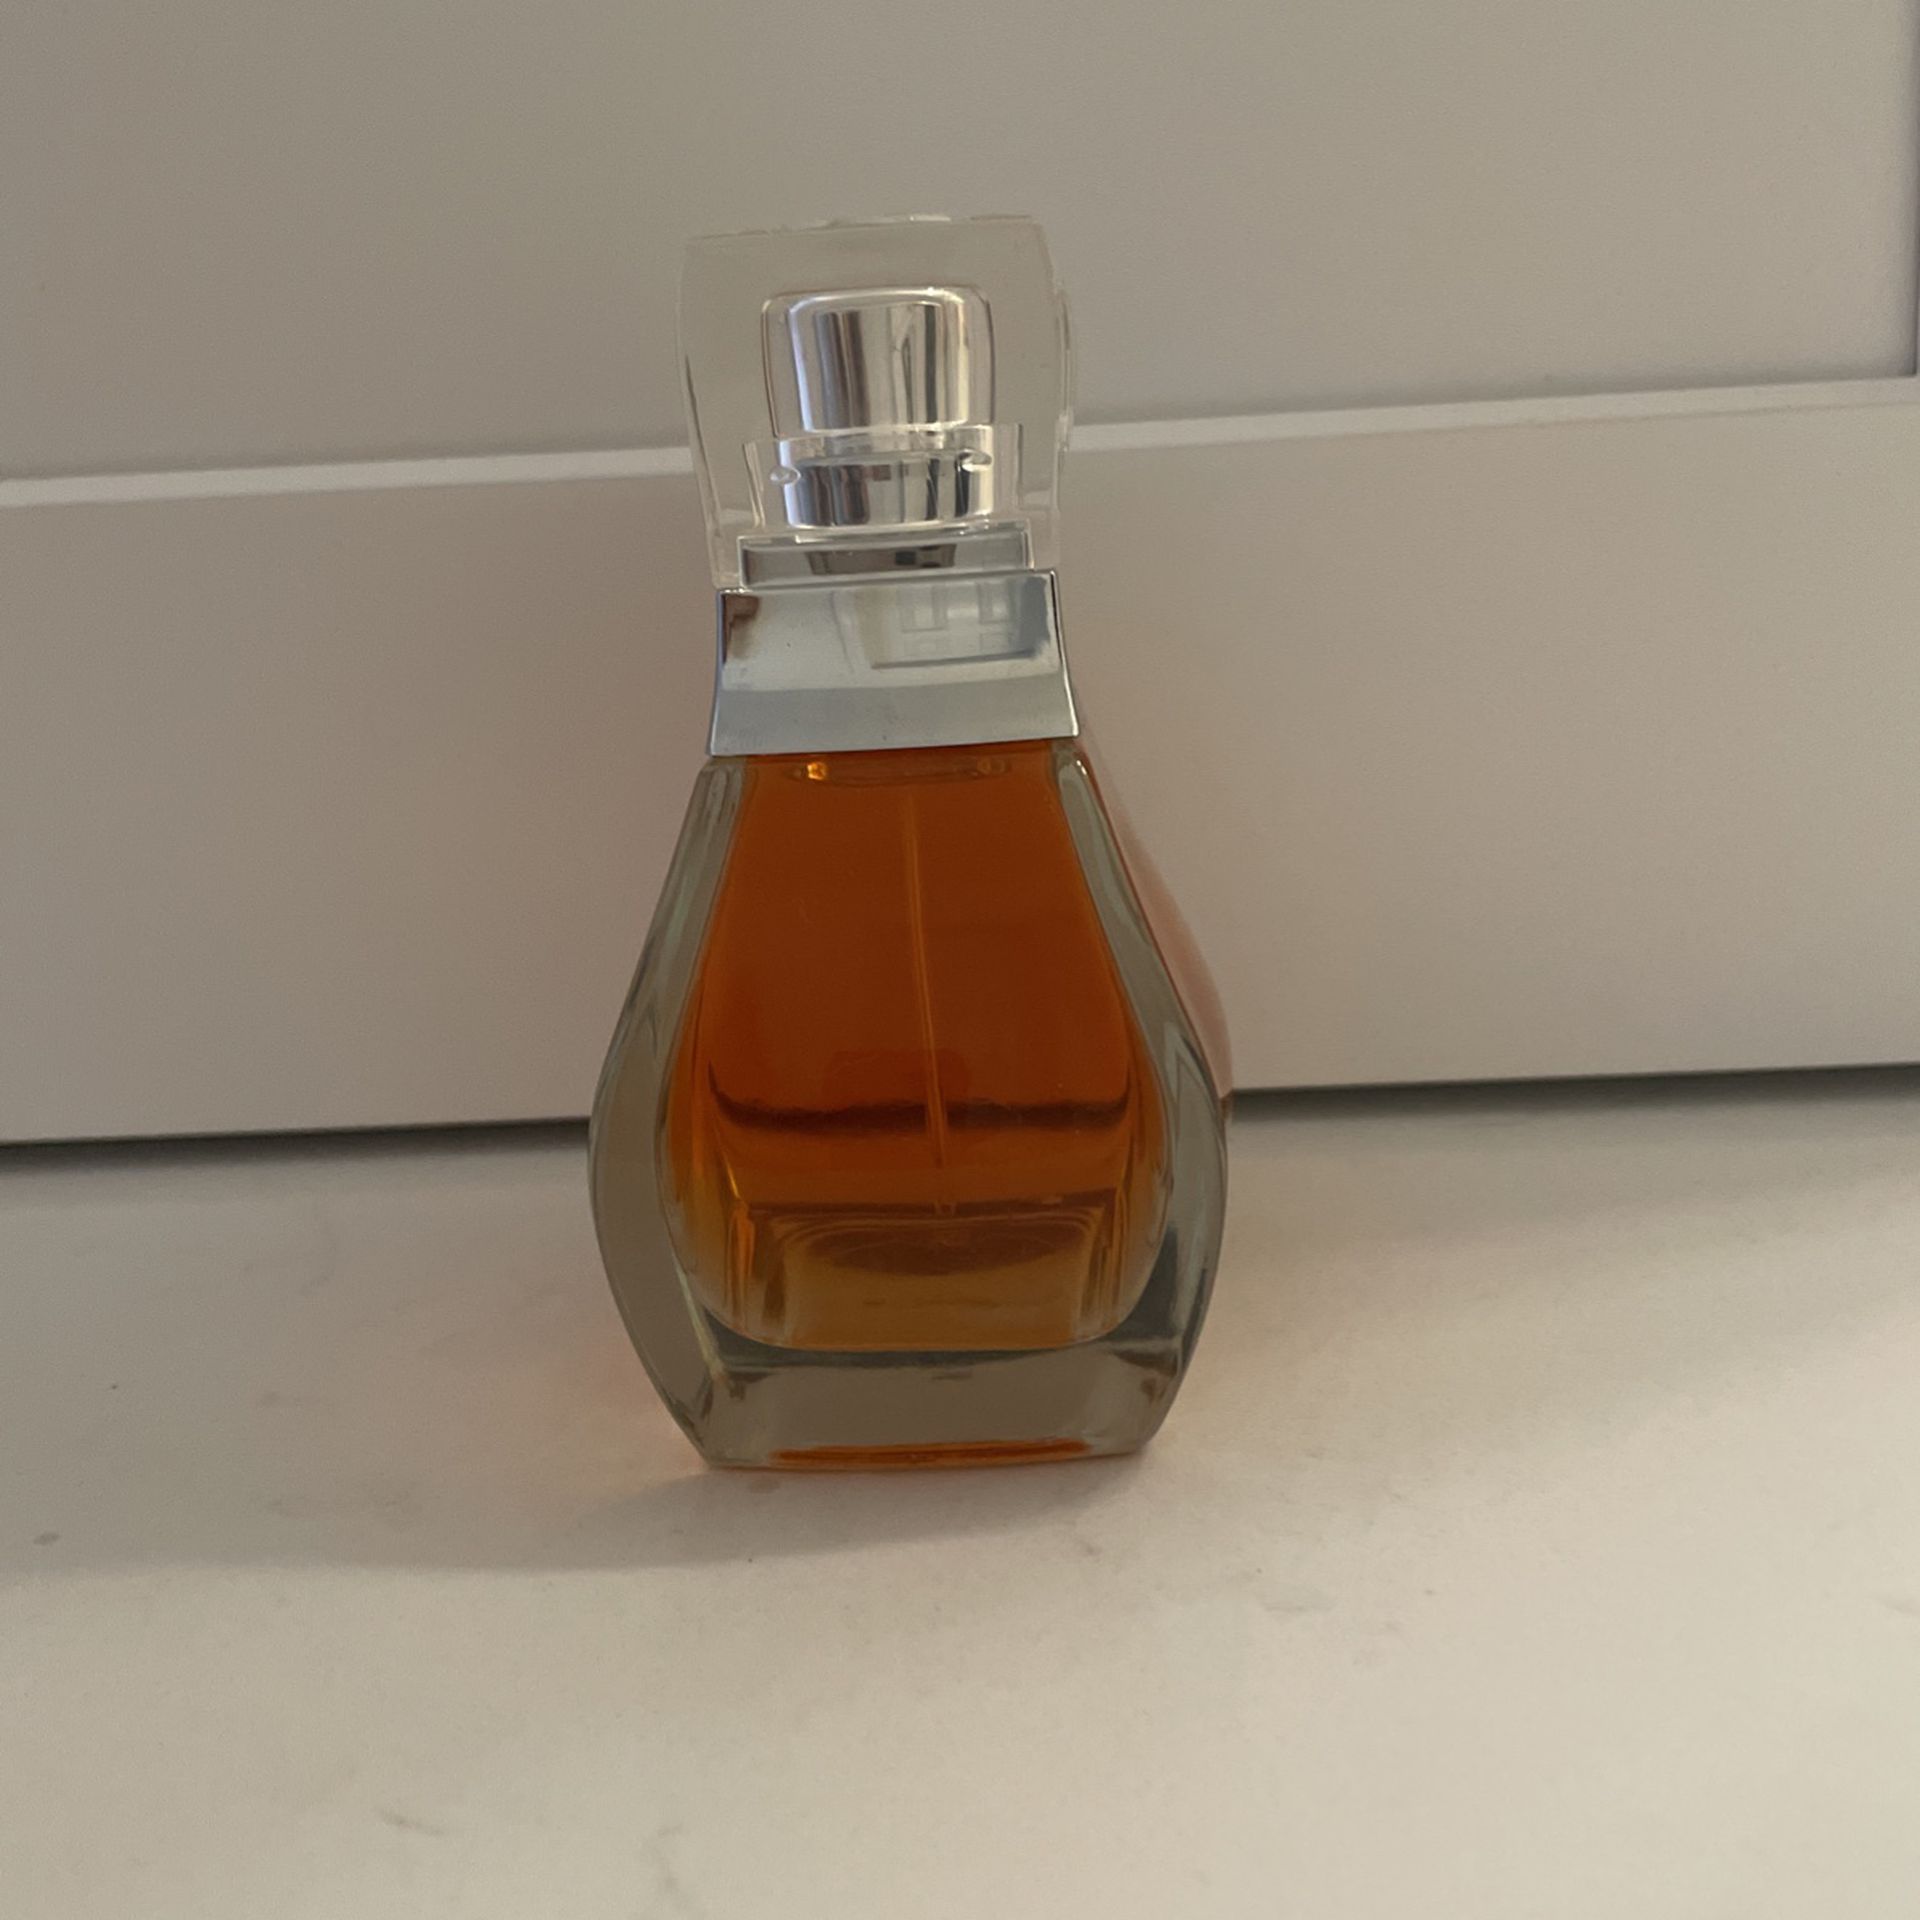 Conviction Perfume 3oz for Sale in Wesley Chapel, FL - OfferUp